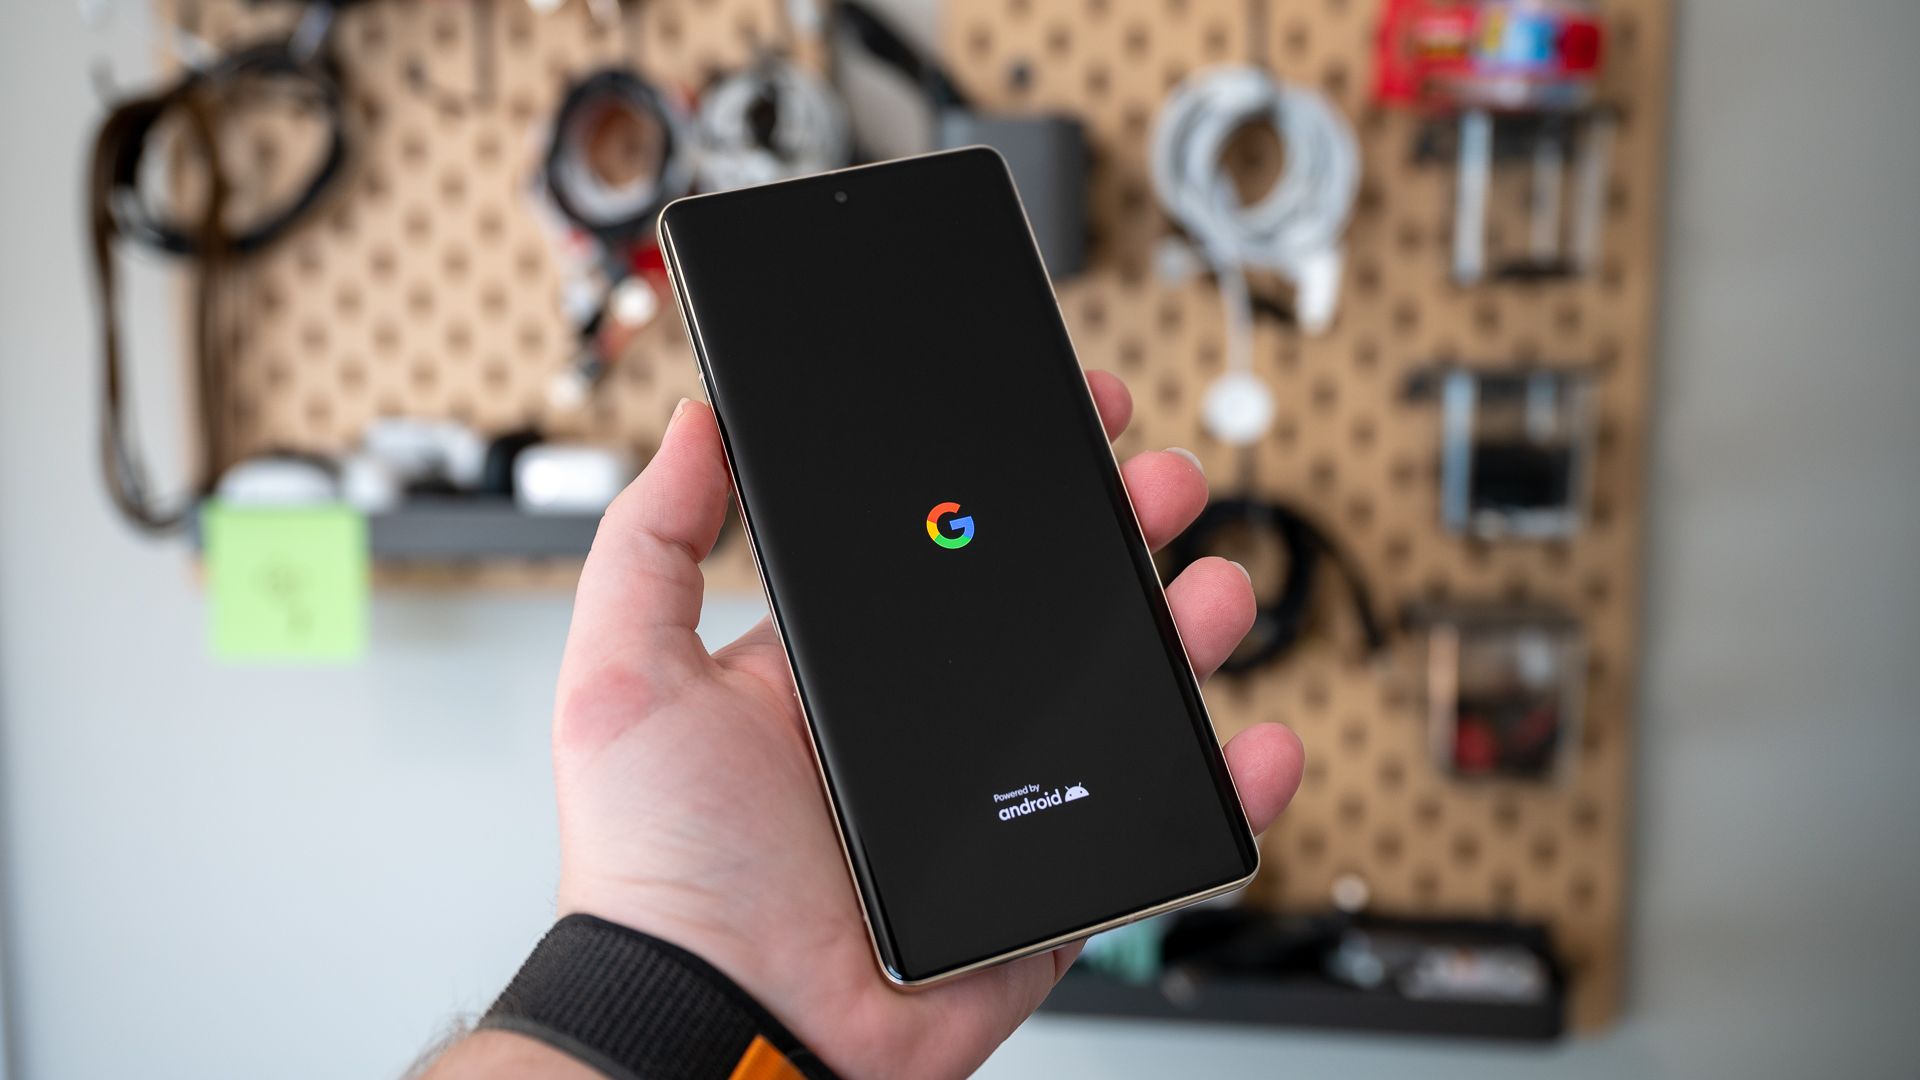 Google and Powered by Android logo seen during the Android 13 bootup screen on the Pixel 7 Pro